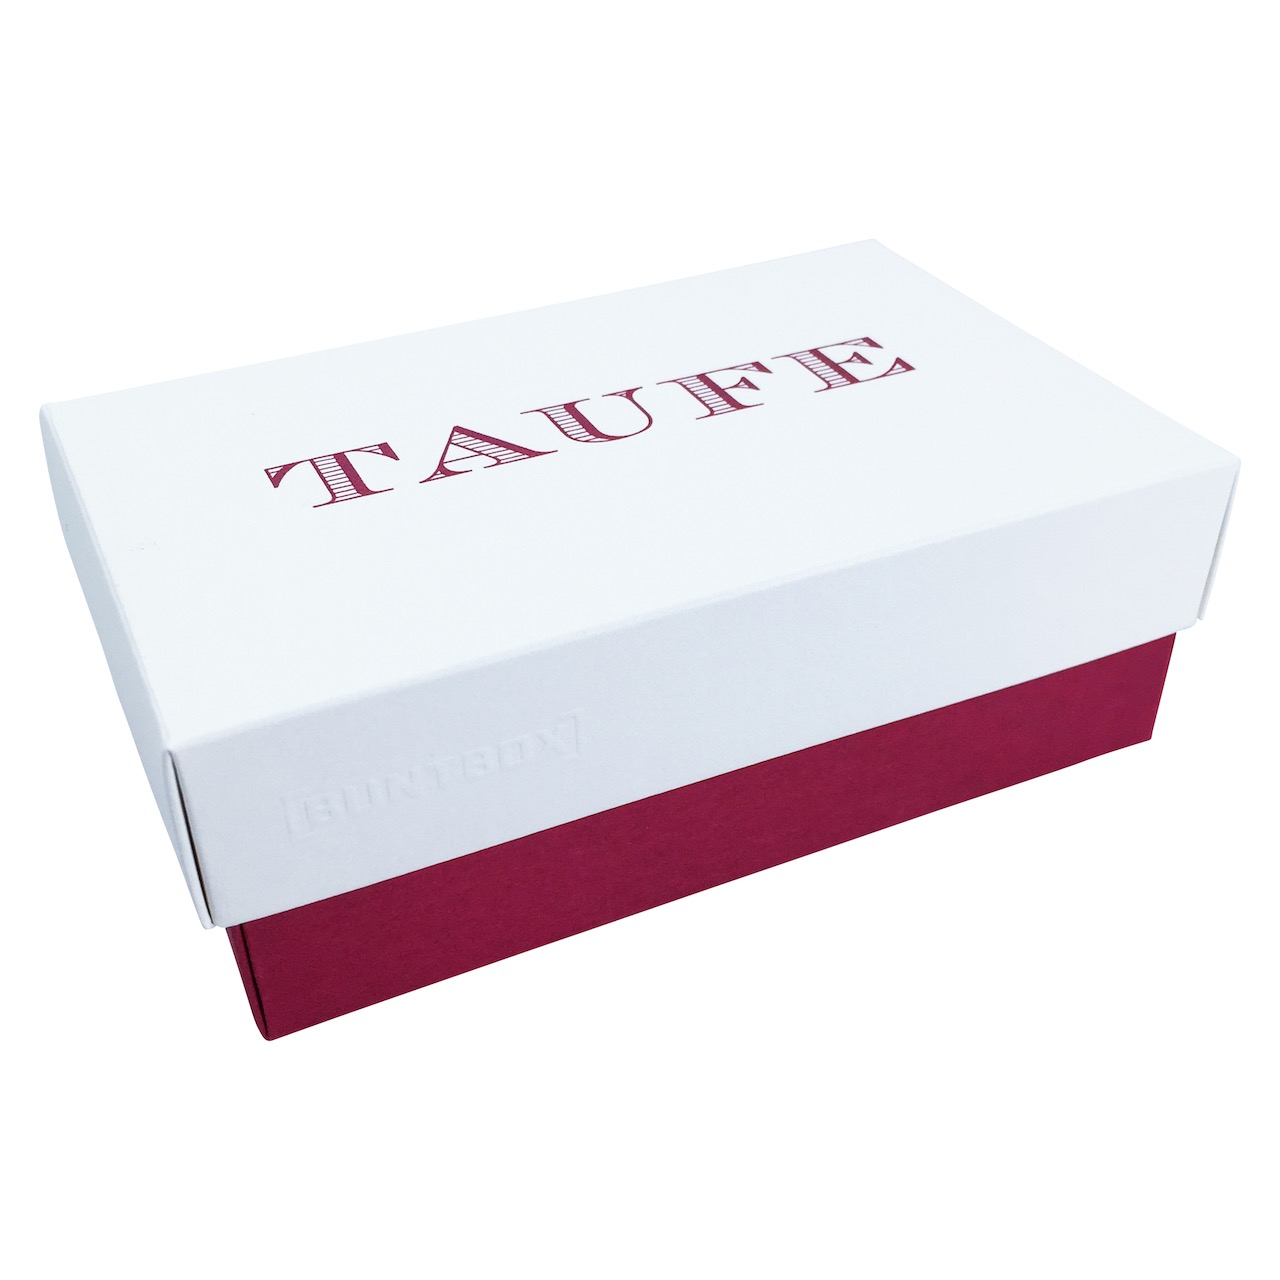 Buntbox L Fine Paper Taufe in Champagner-Bordeaux